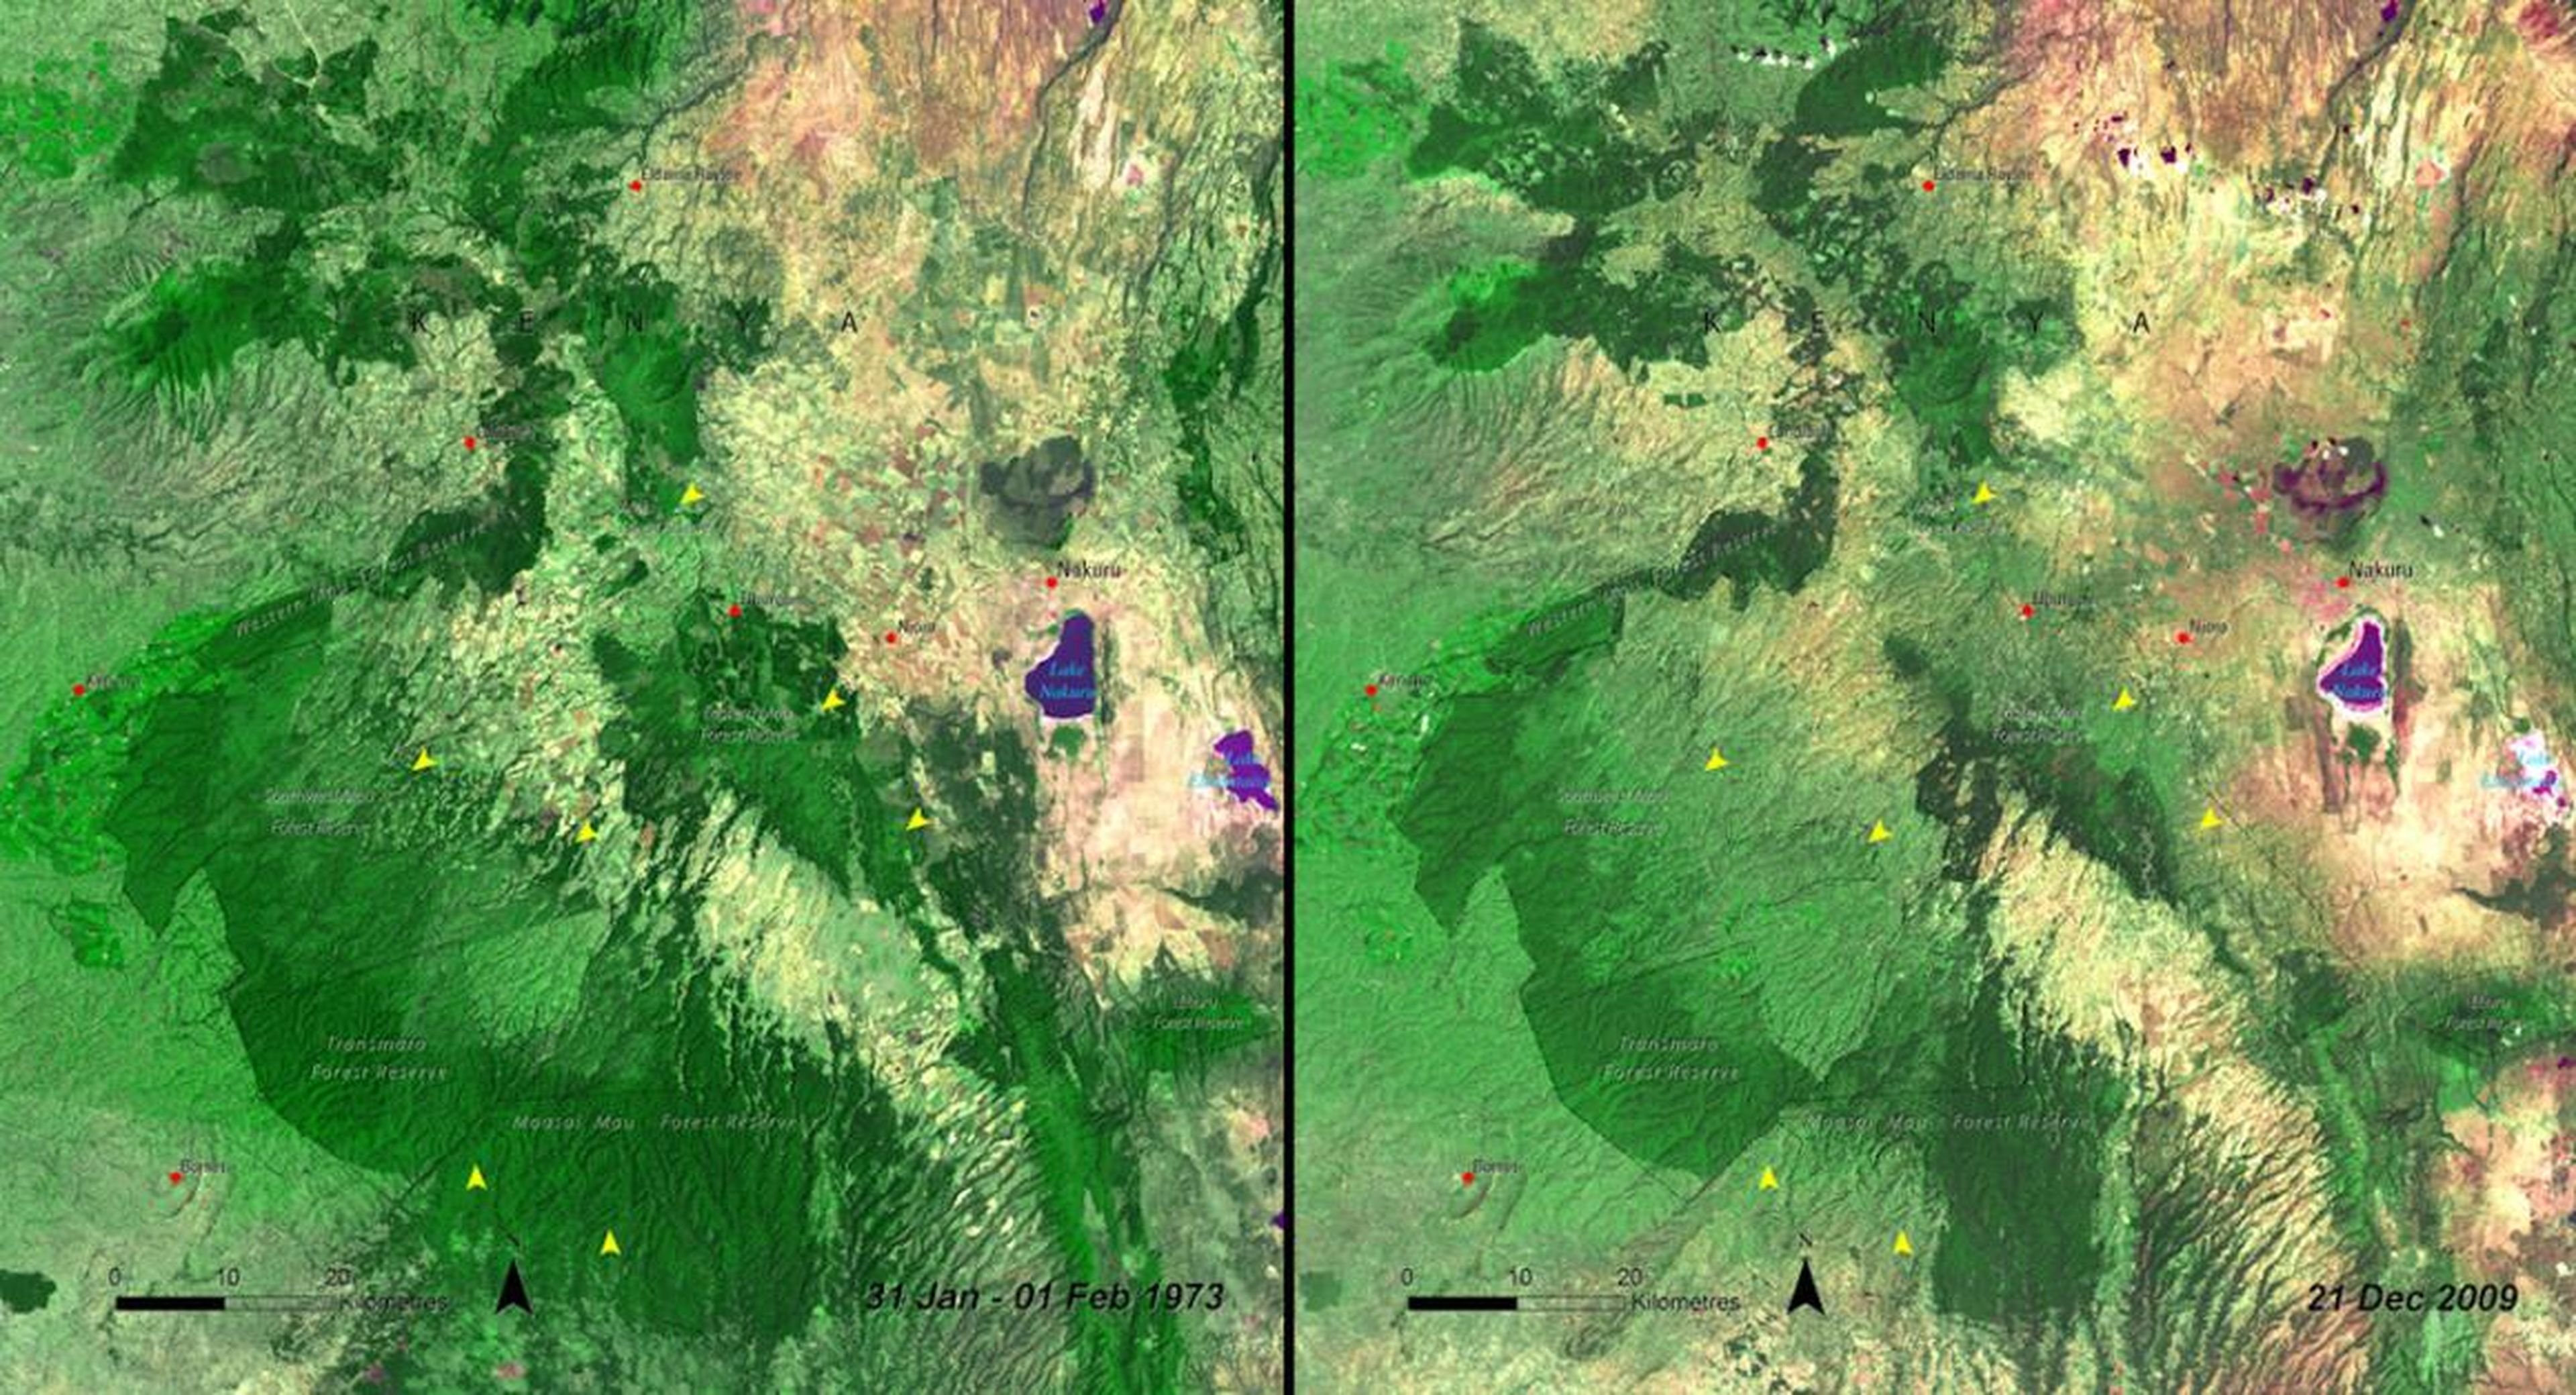 Every year, more than 18 million acres of forest disappear worldwide. That's about 27 soccer fields' worth every minute. More deforestation is visible in Kenya's Mau Forest in these photos from January 1973 (left) and December